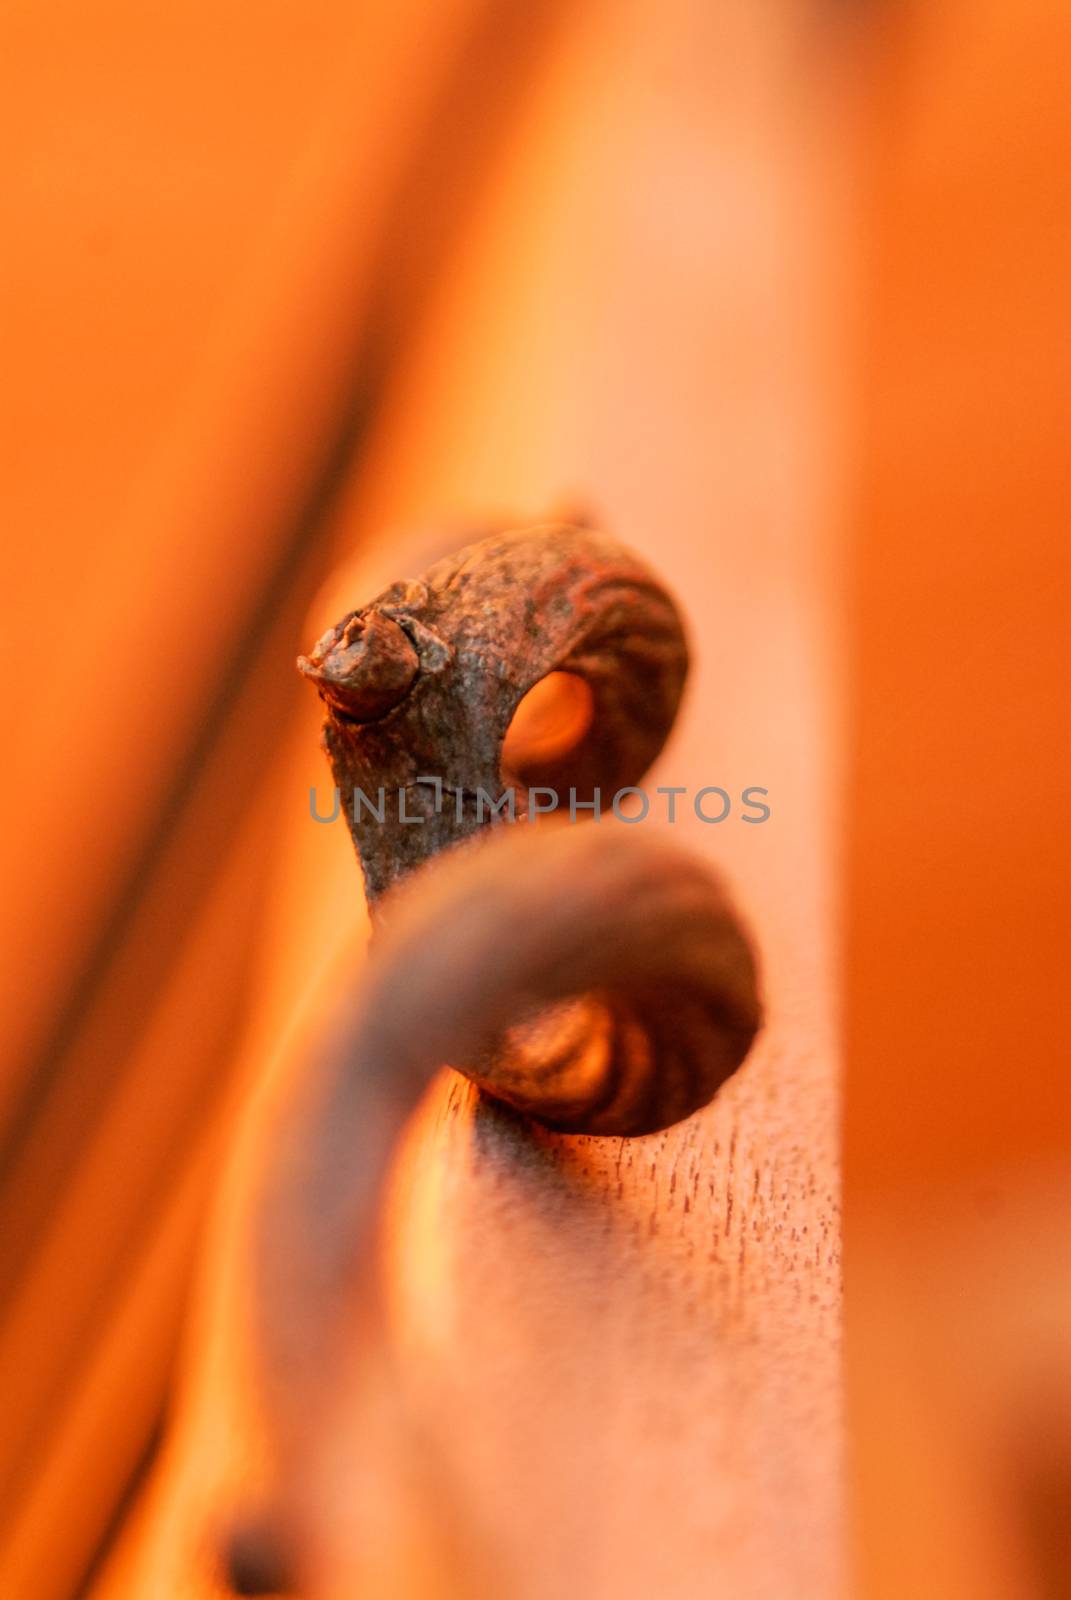 Abstract wooden plant tendril orange on wood